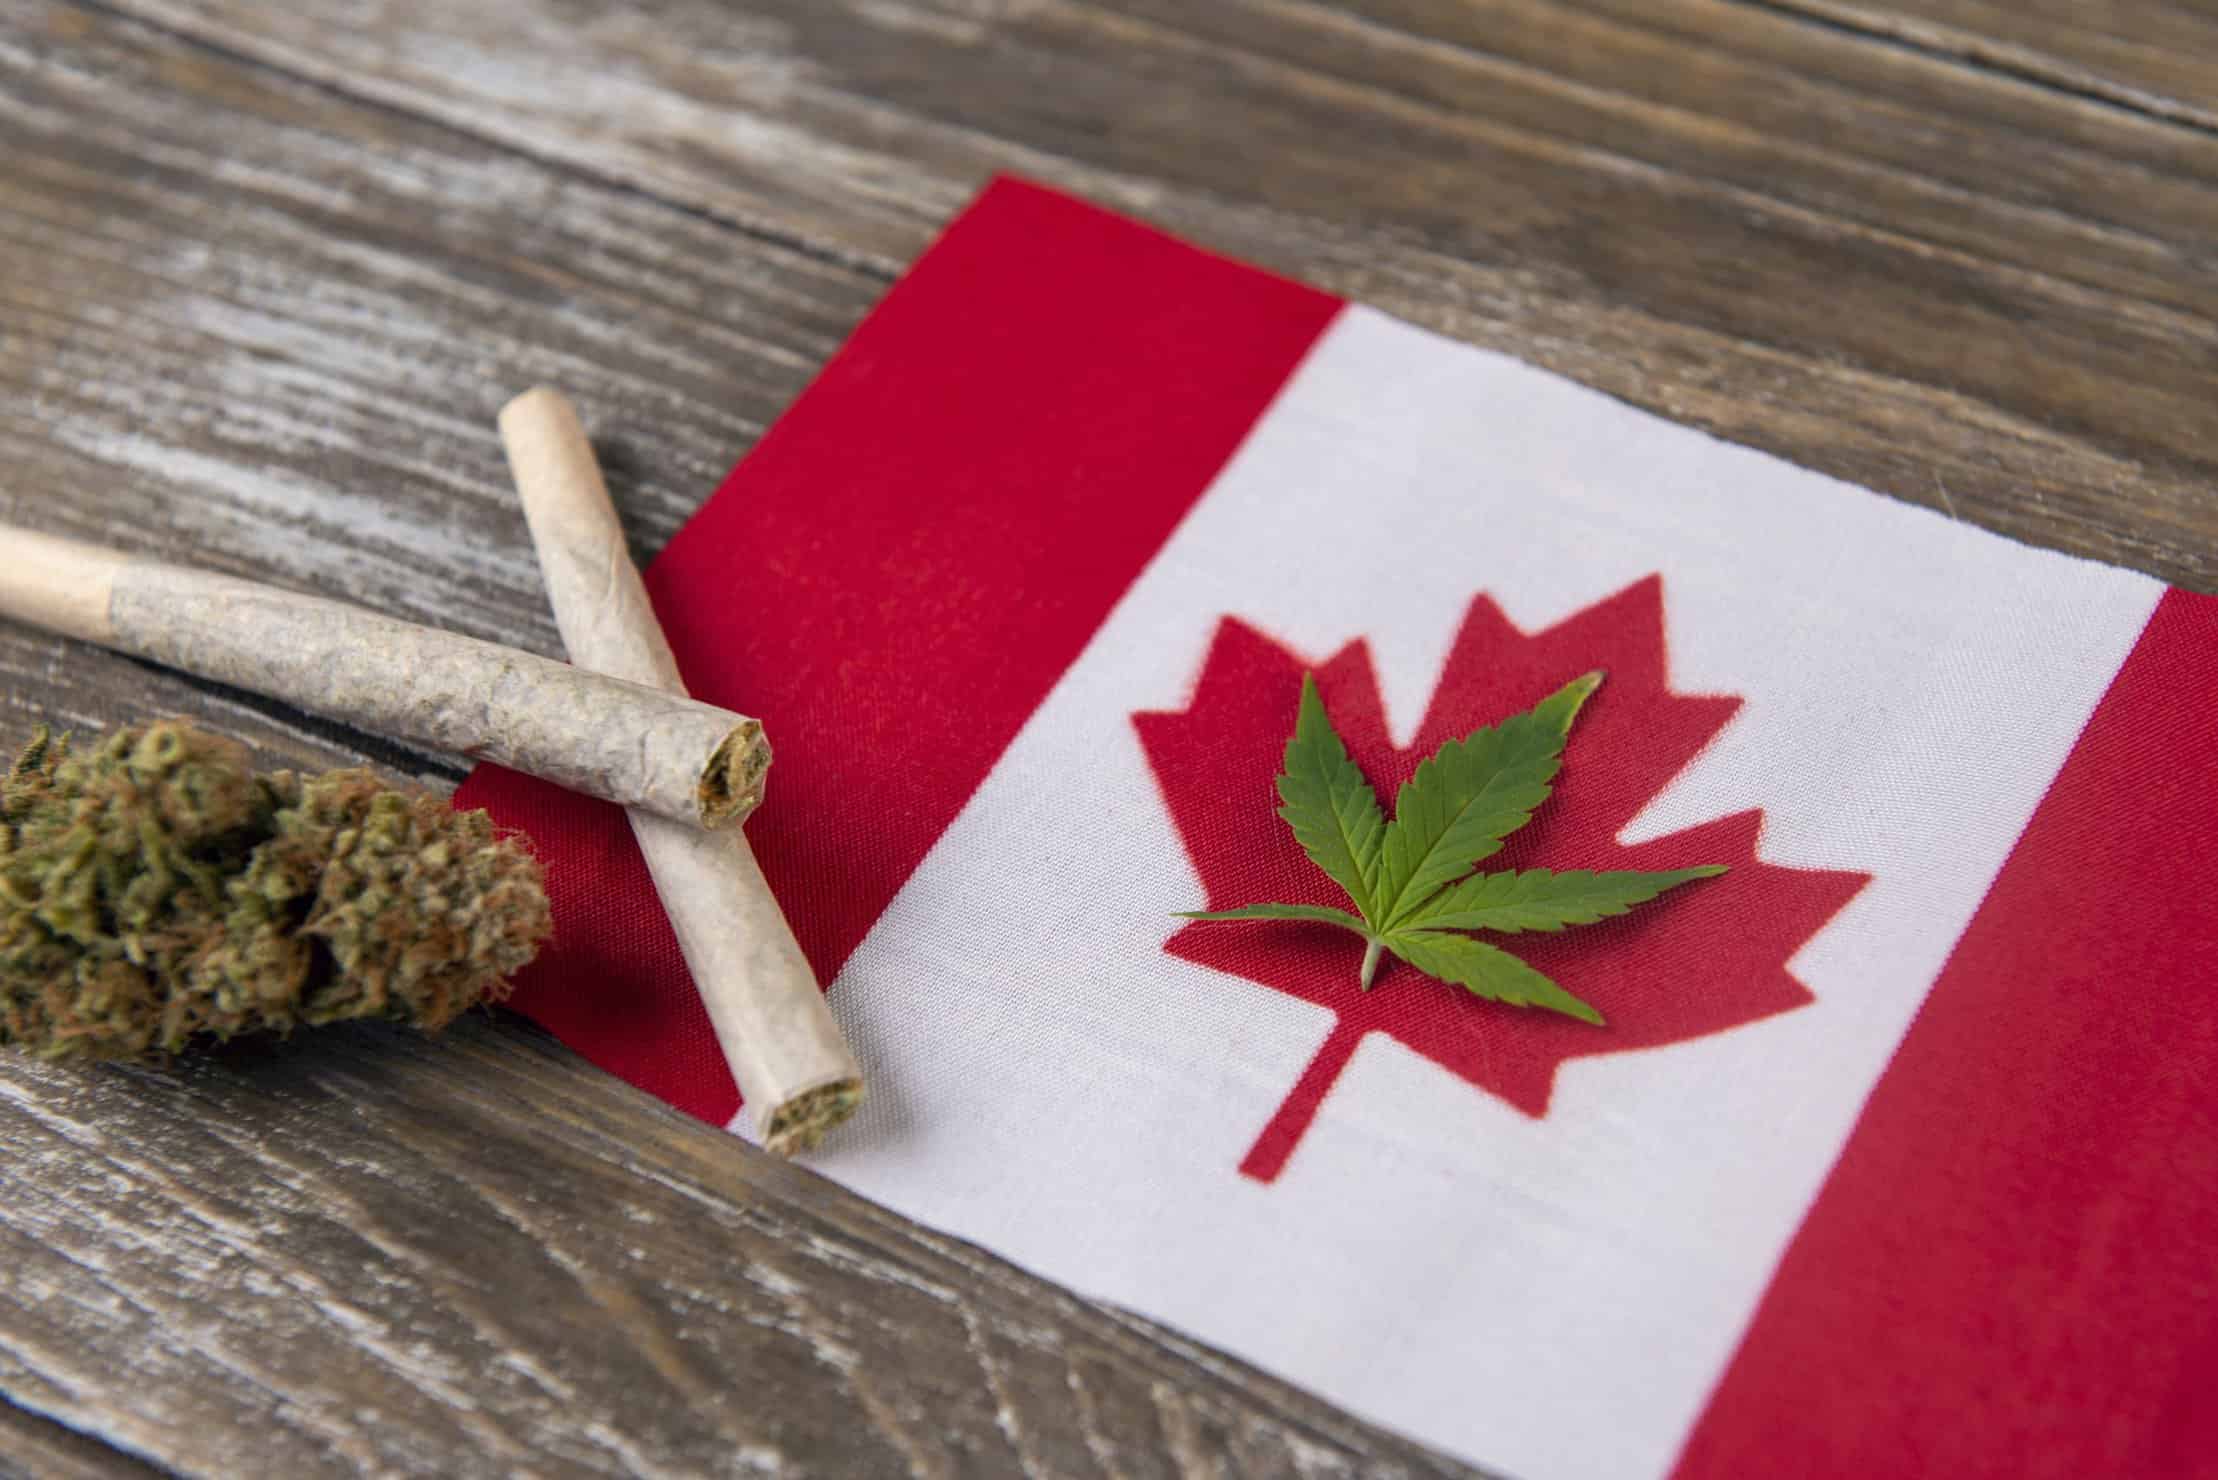 Cannabis Marketing and Advertising Rules in Canada